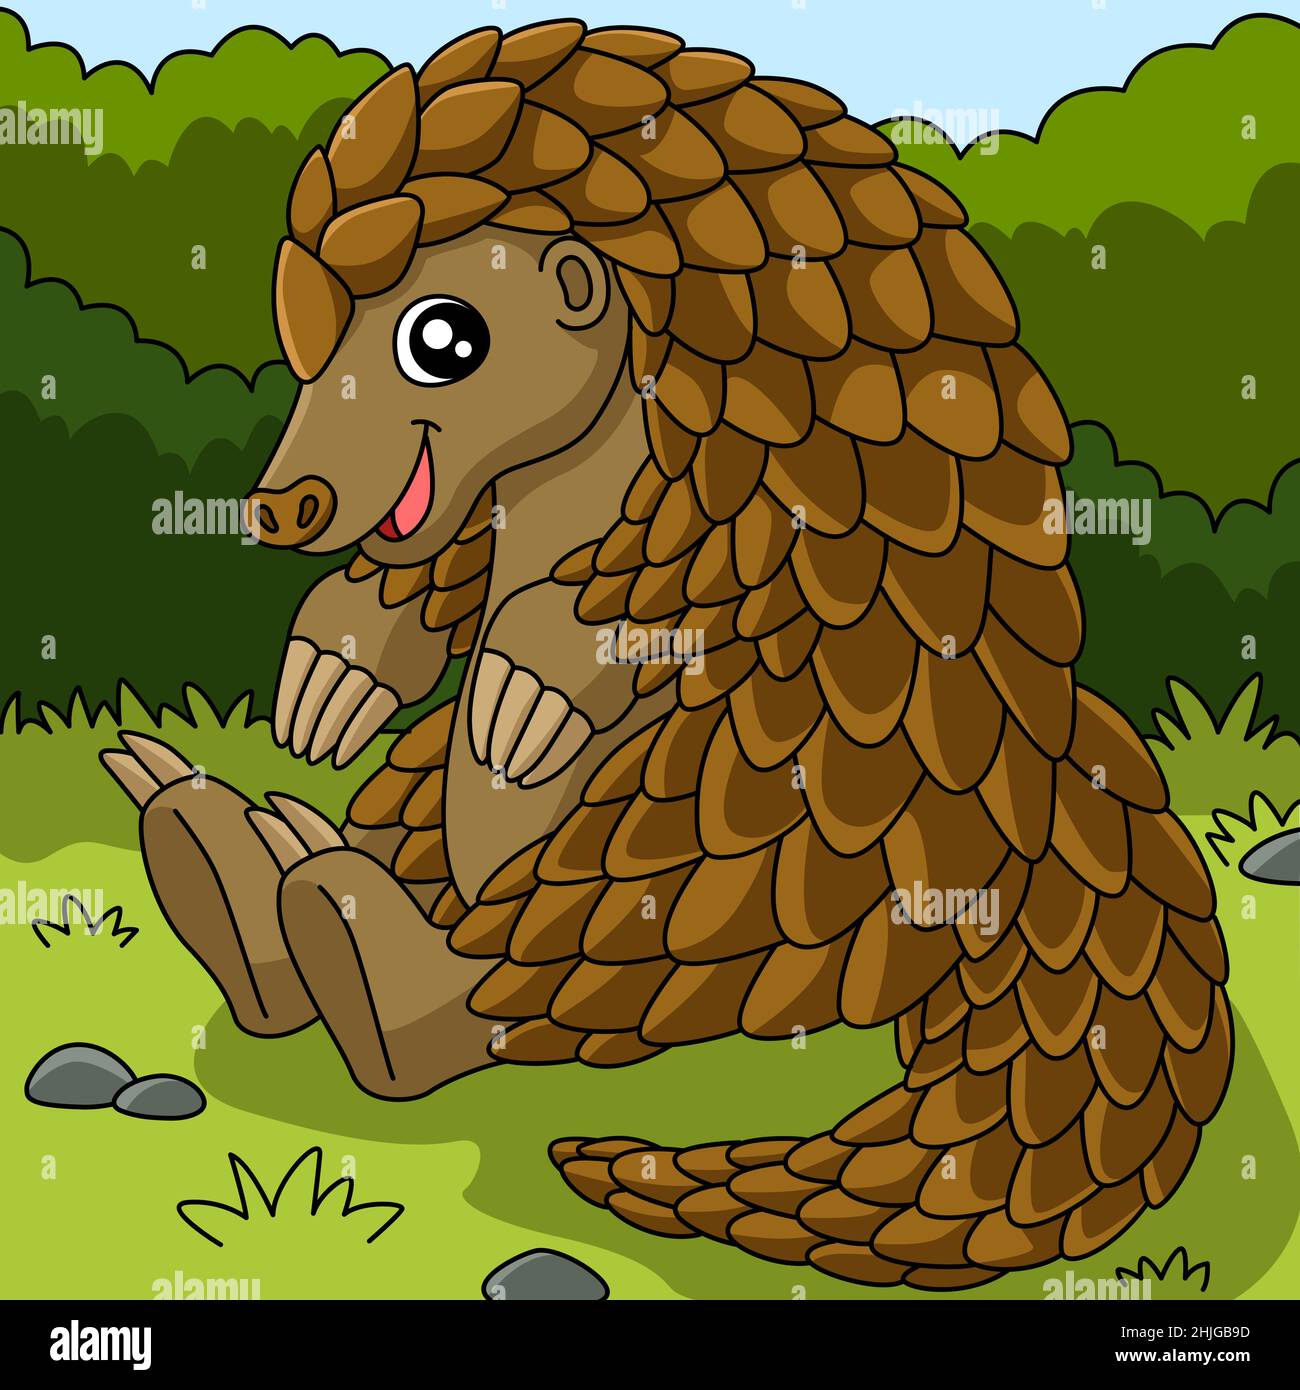 The largest Pangolin that ever lived, meet the Asian Giant Pangolin (Manis  palaeojavanica). Range: Probably occurred only in Sumatra, Borneo, and Java  but who knows! Lived in the Late Pleistocene to possibly